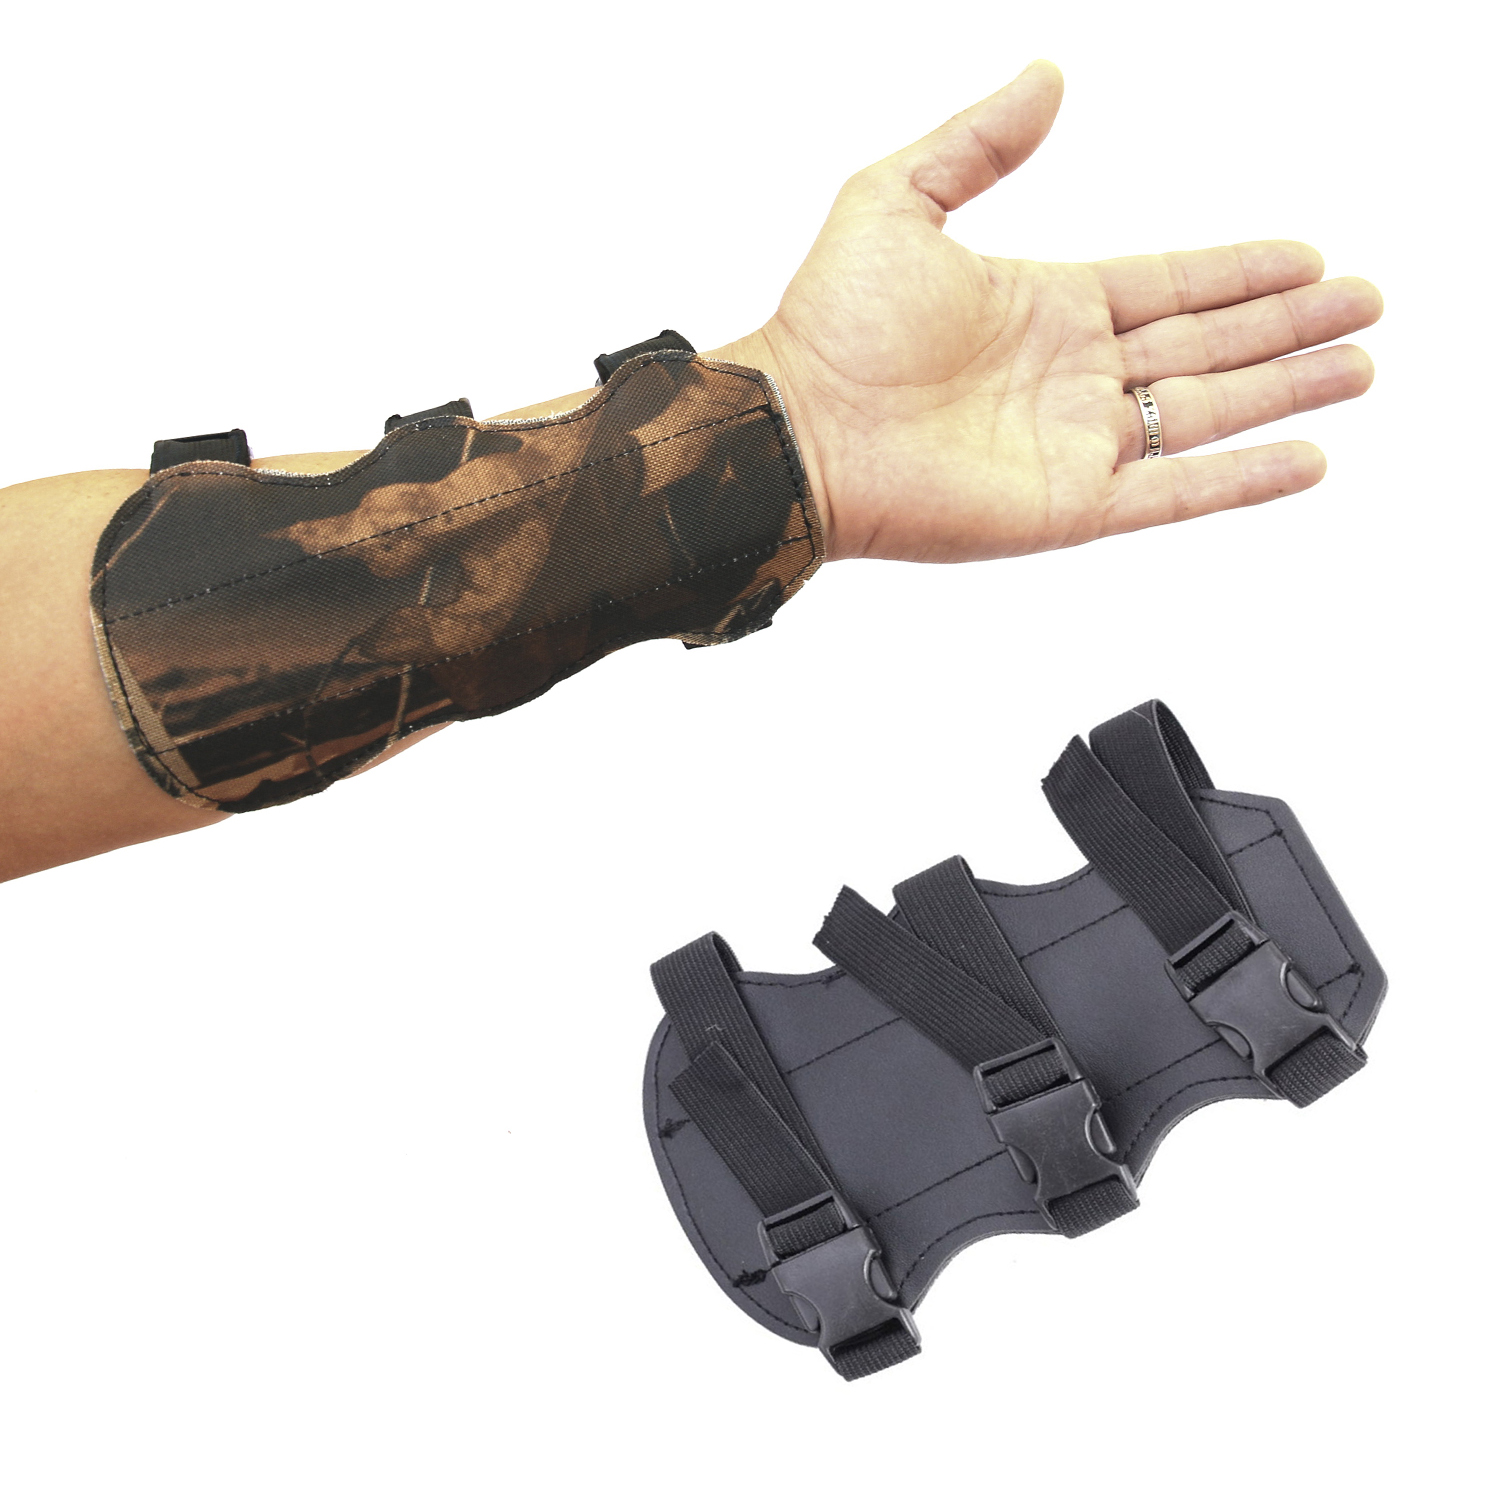 1 pcs Archery Arm Protector Guard For Men  Bow Shooting Armband 3 Straps Shoot Forest Camo / Black Arm Guard